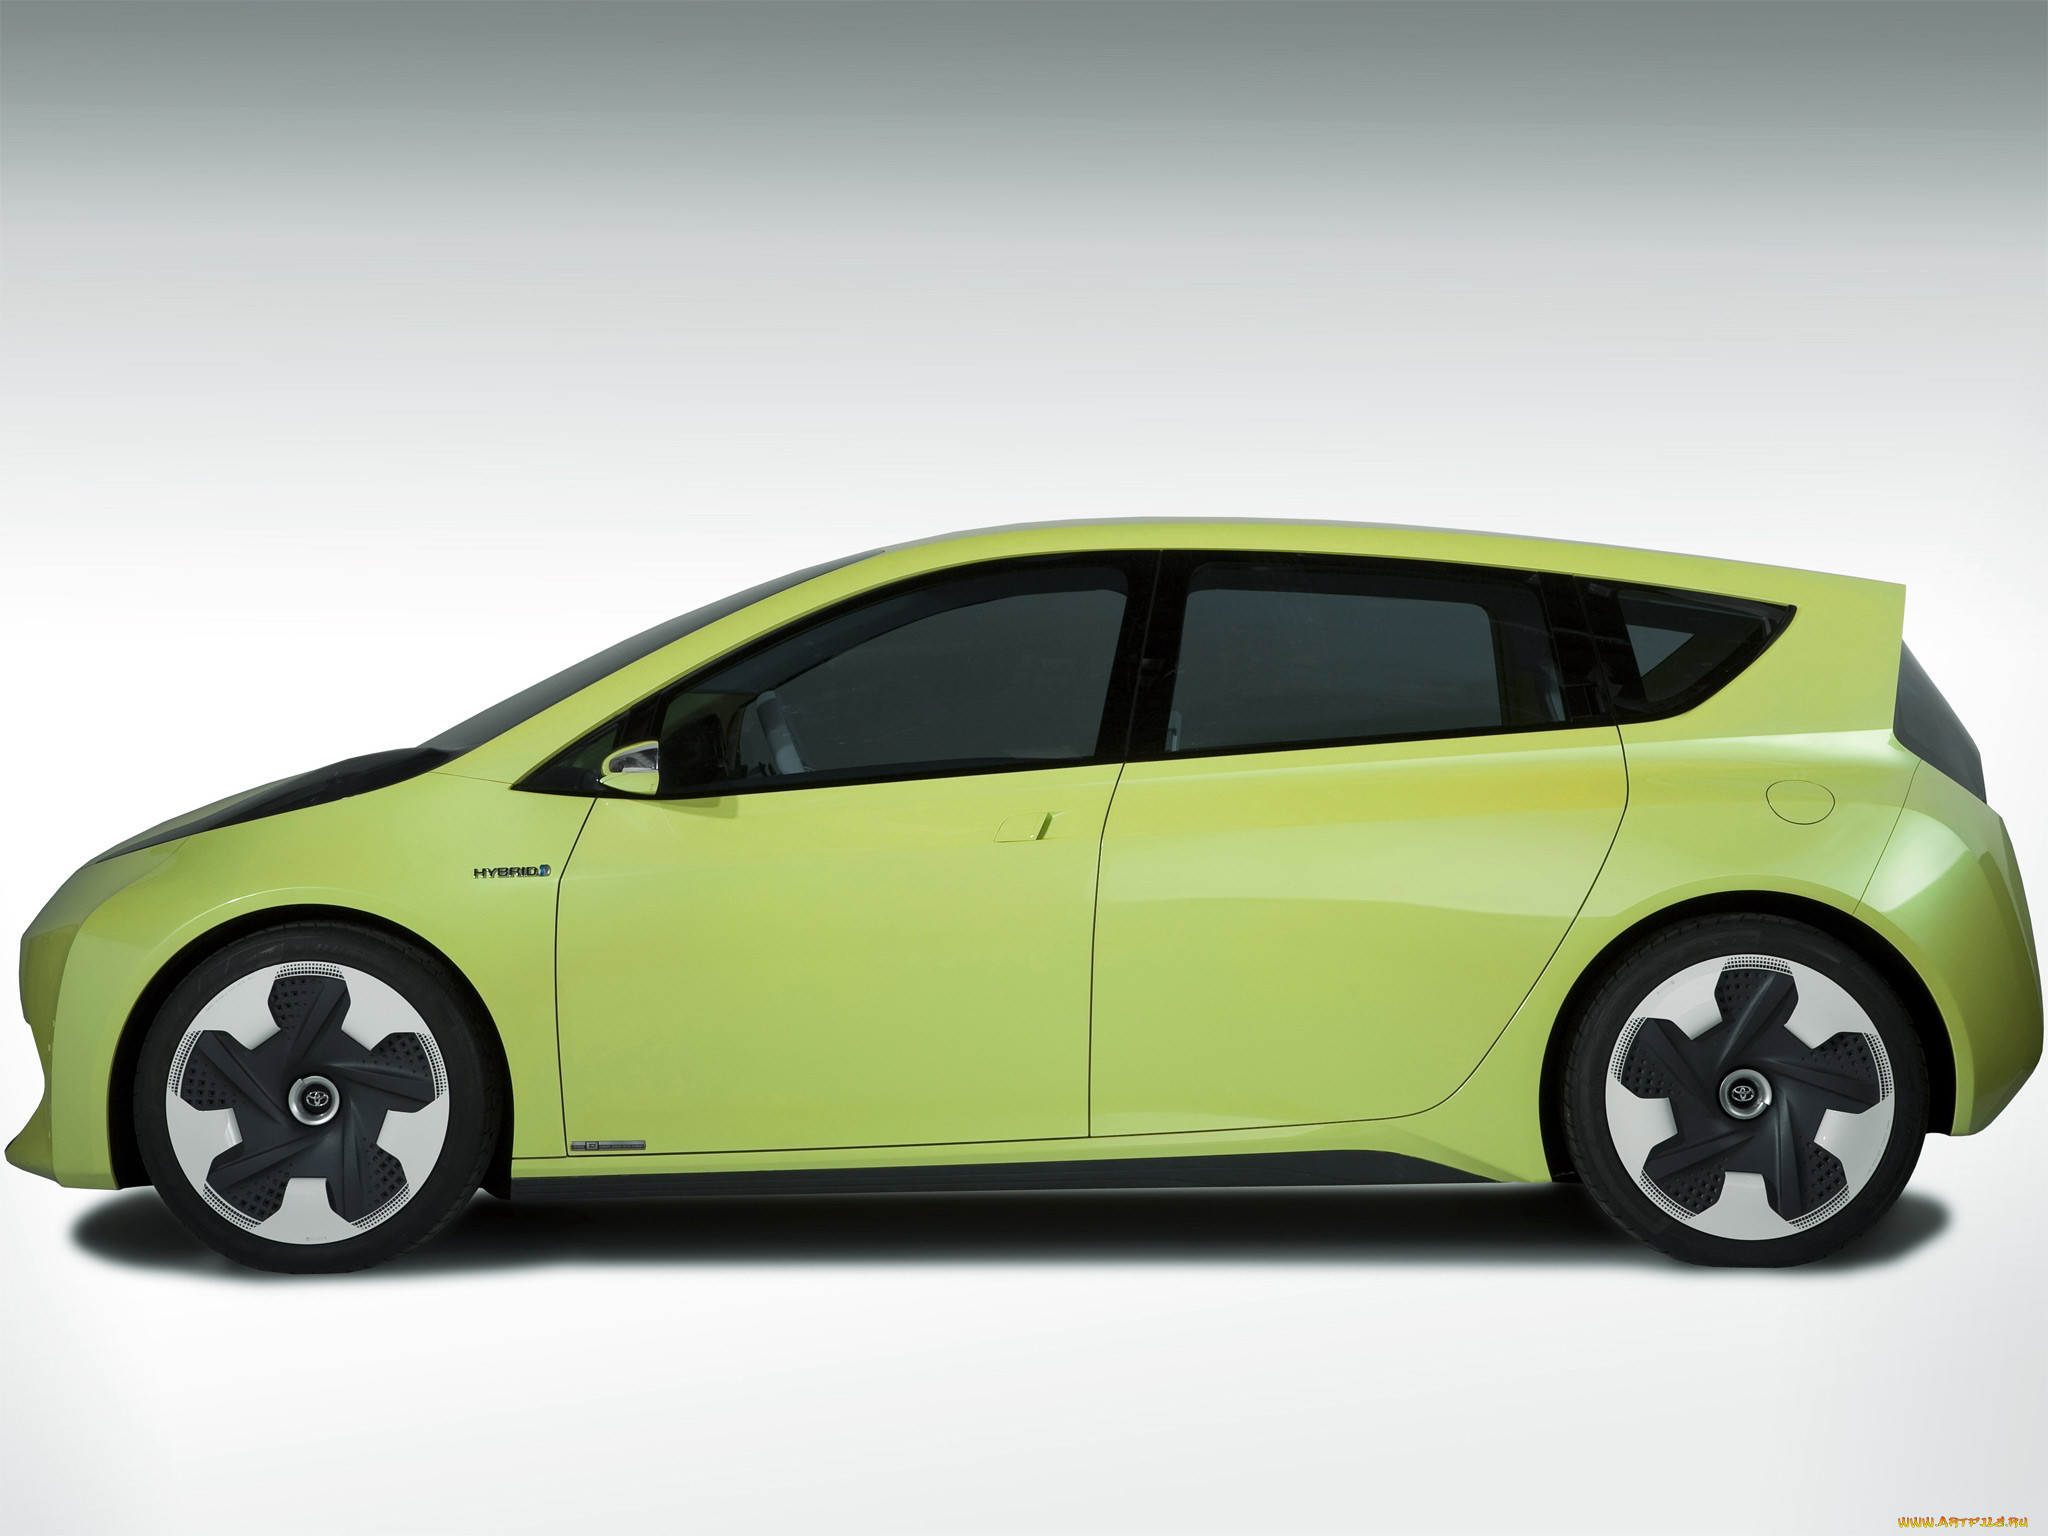 toyota ft-ch concept 2010, , toyota, 2010, concept, ft-ch